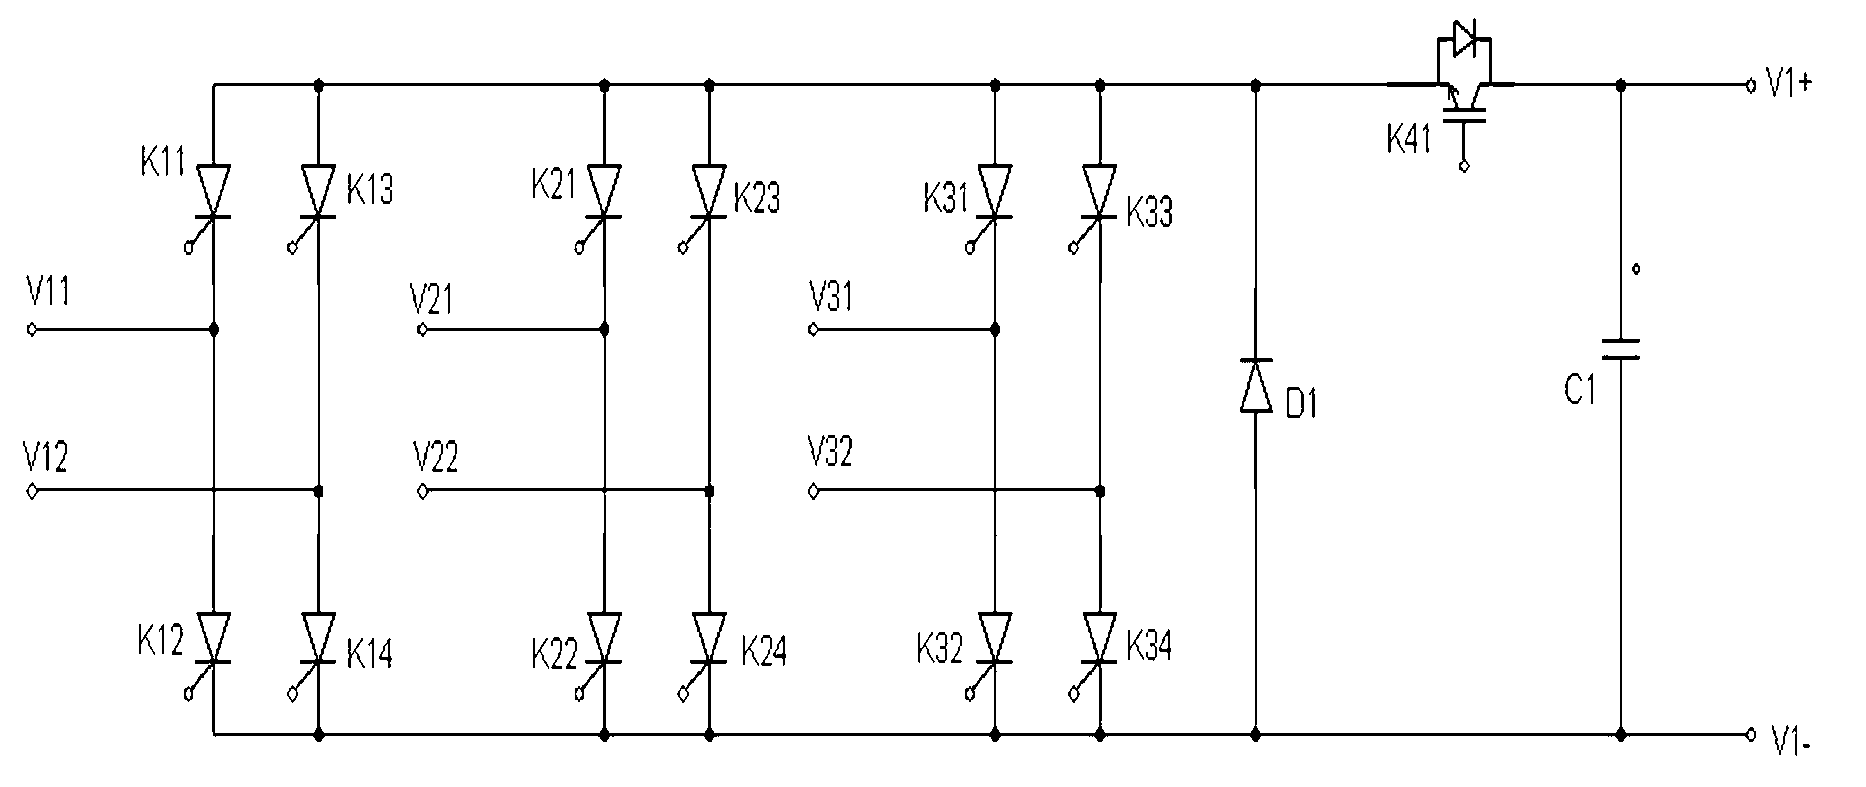 Large-capacity inversion grid-connected device